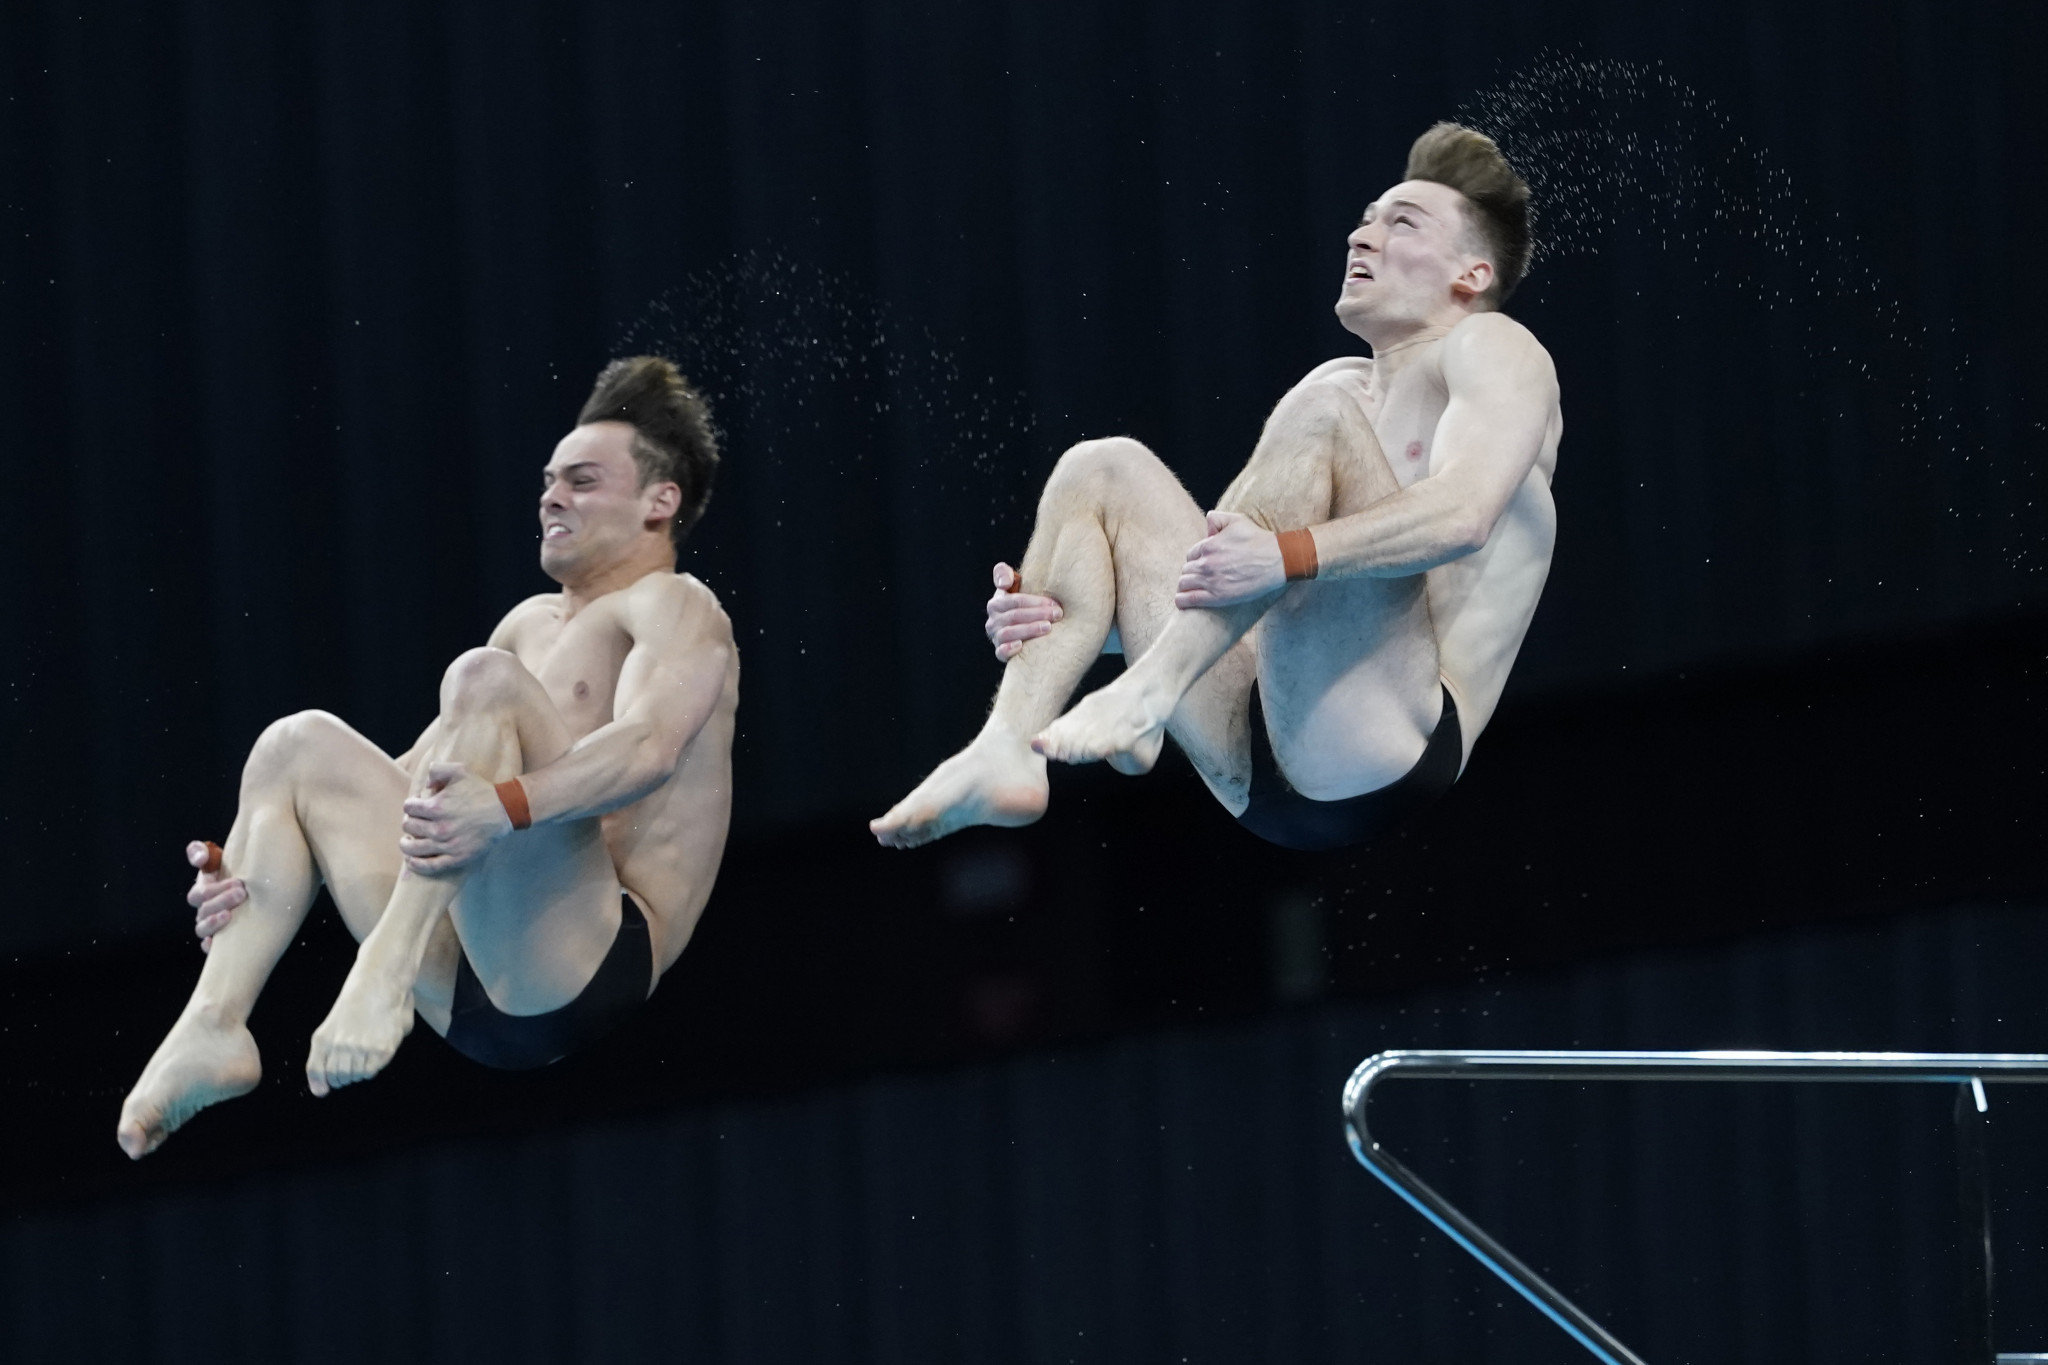 Britain and Germany take golds on penultimate day of diving at European Aquatics Championships